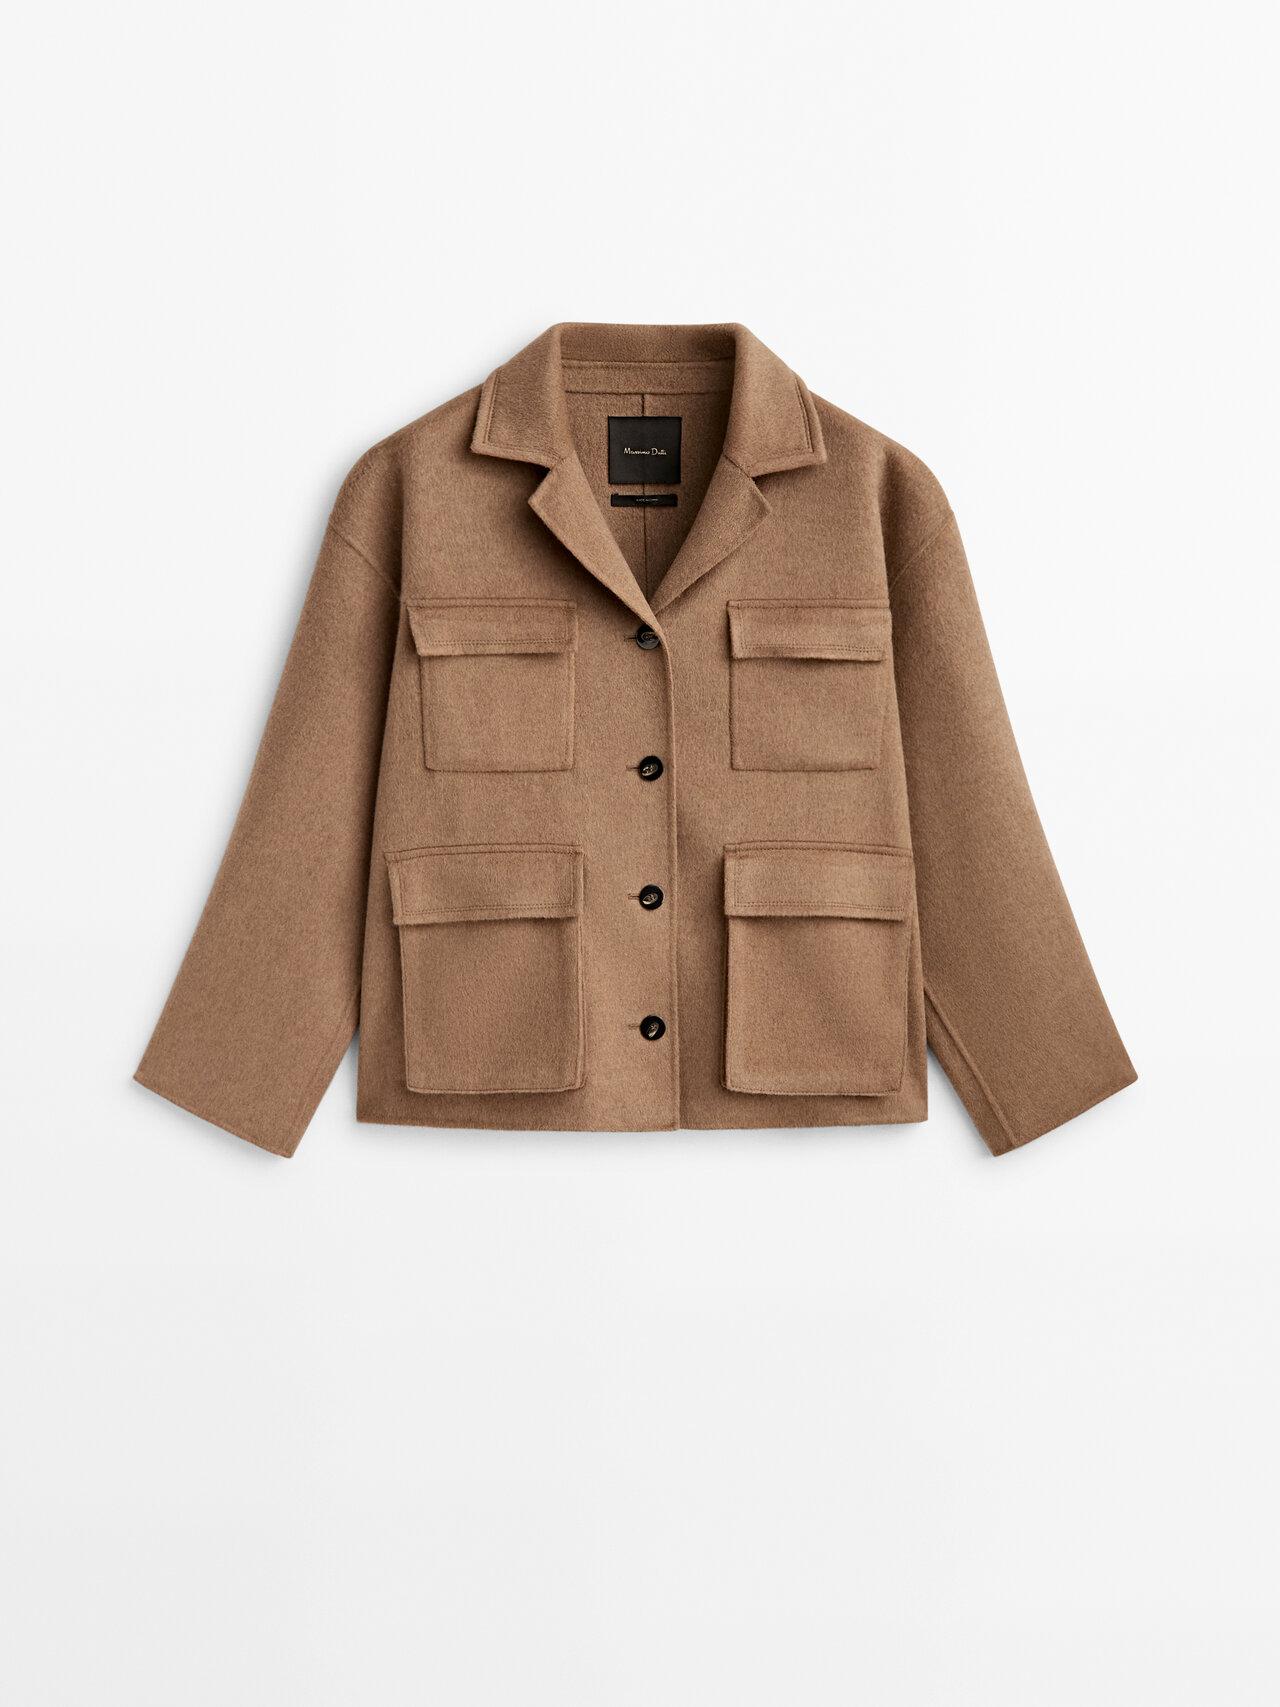 MASSIMO DUTTI Short Wool Blend Coat With Pockets in Brown | Lyst